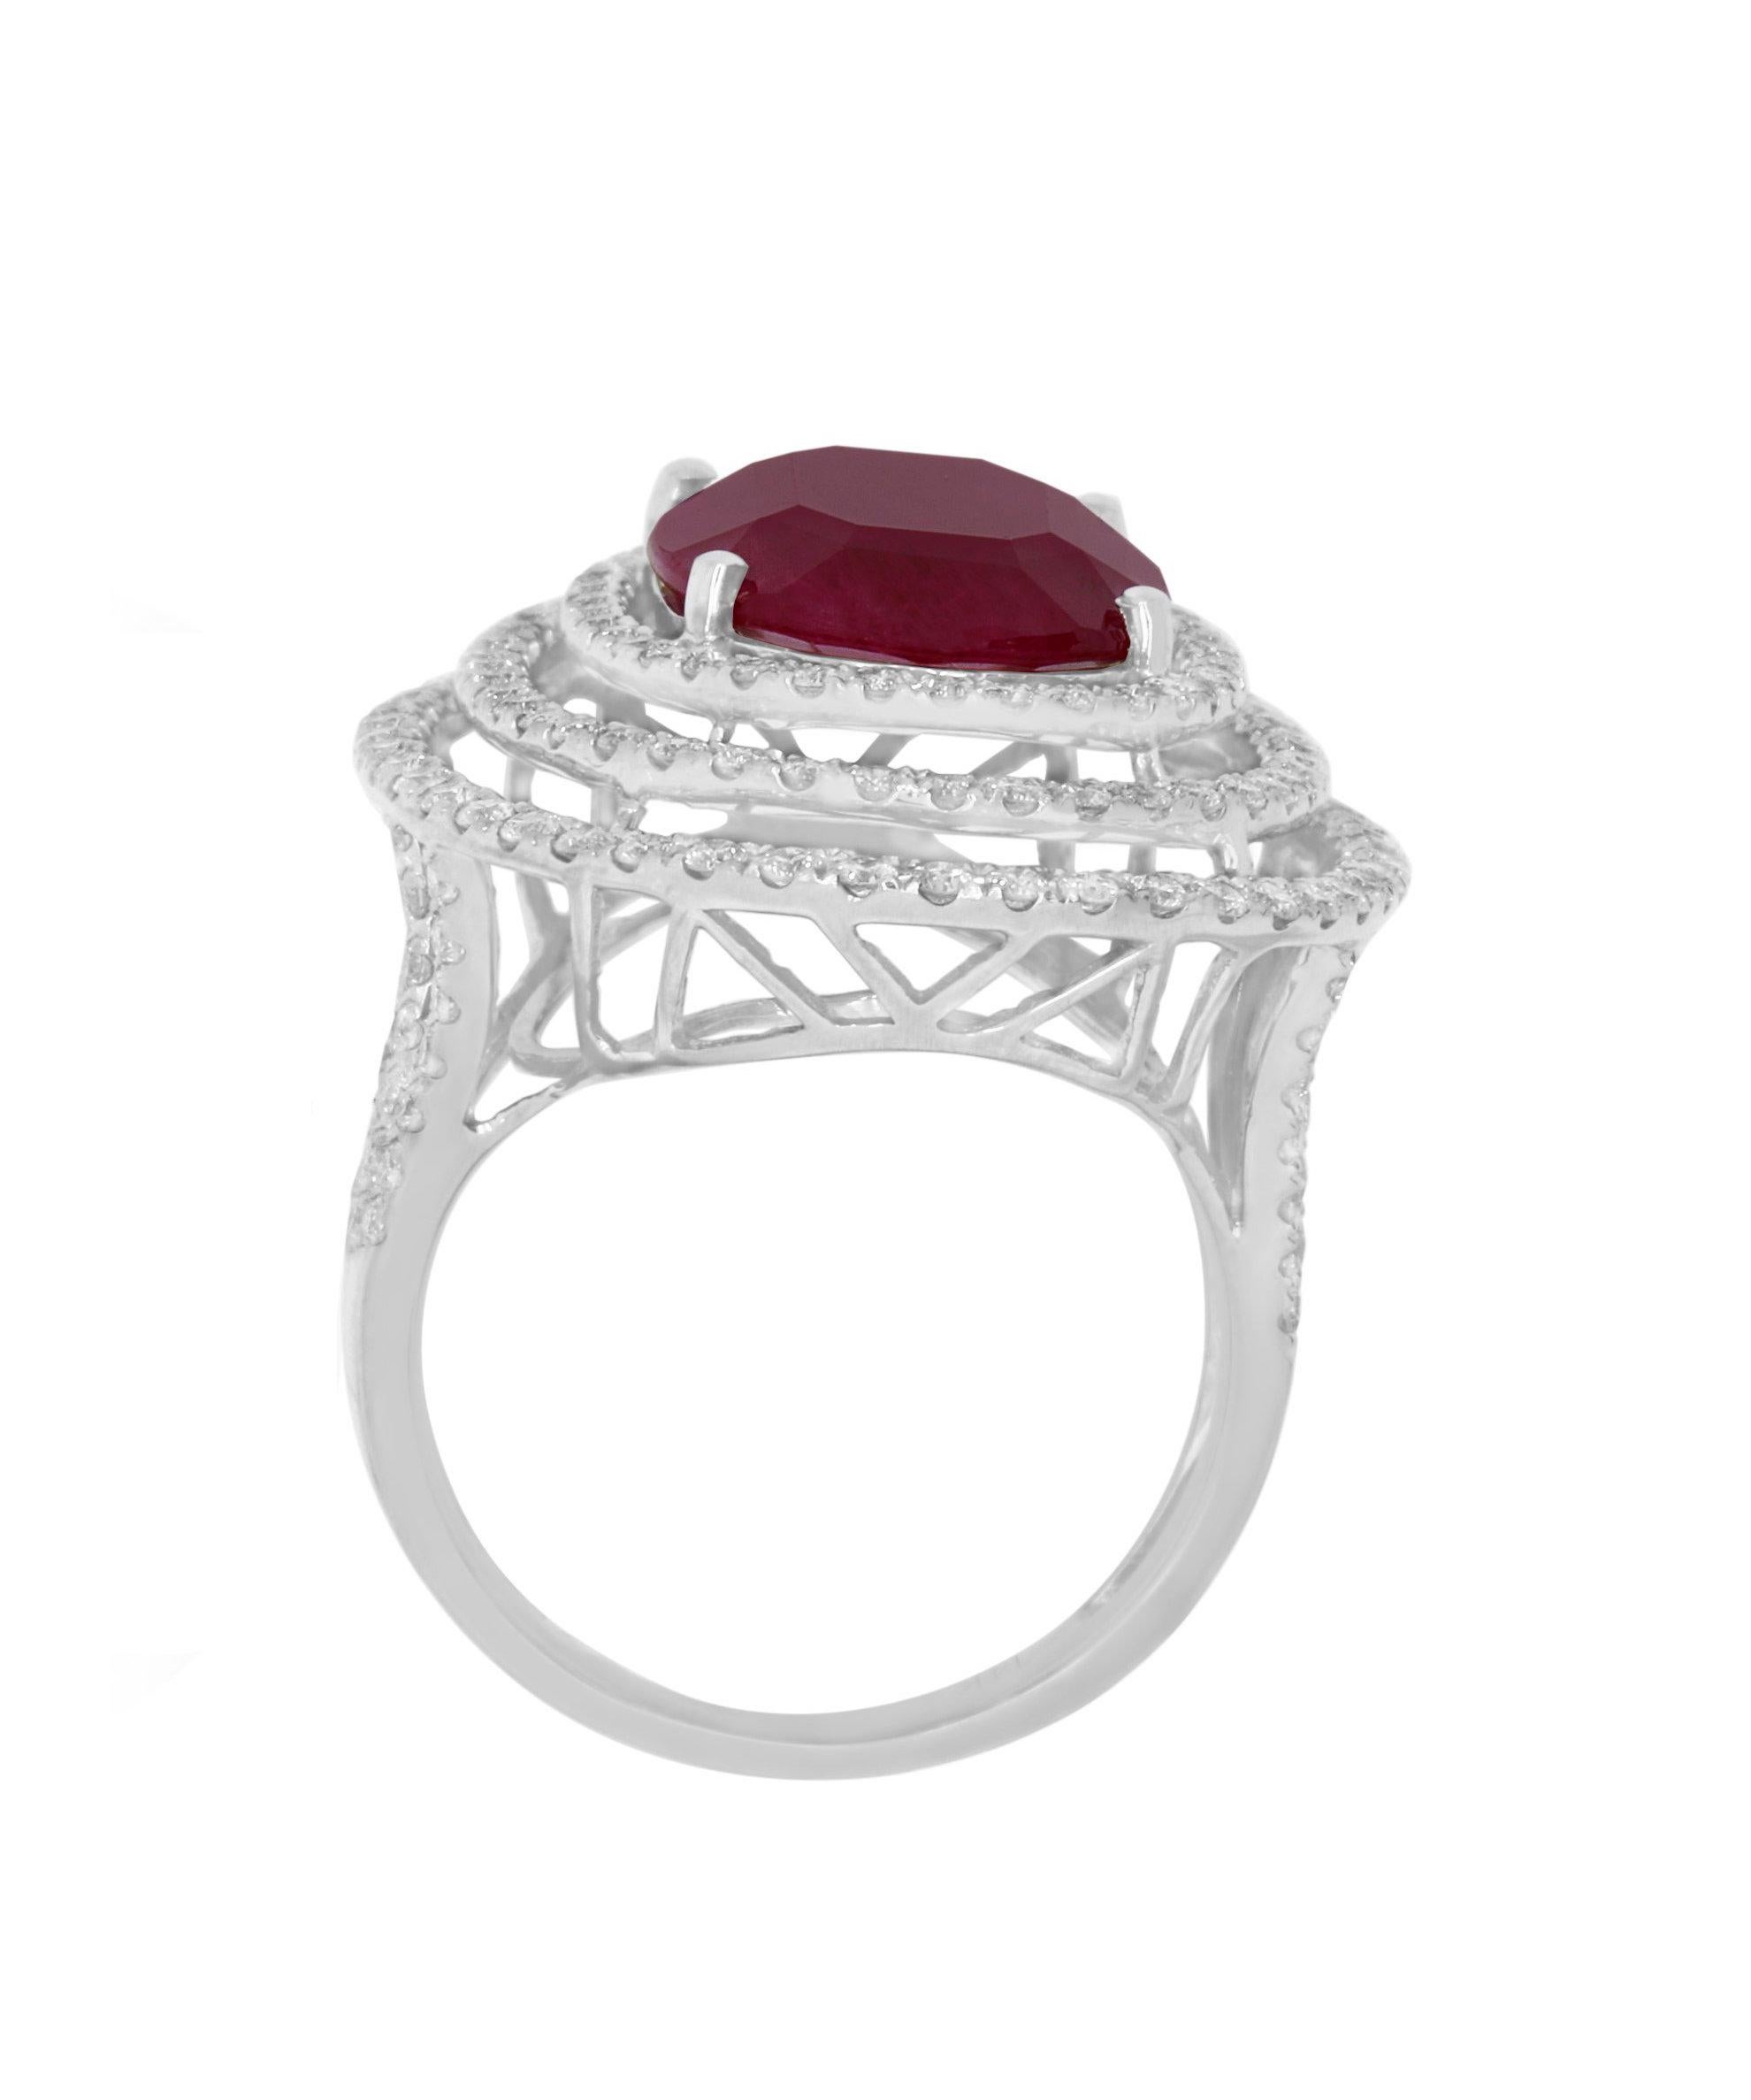 Contemporary 7.06 Carat Oval Ruby and 2.25 Carat White Diamond Ring